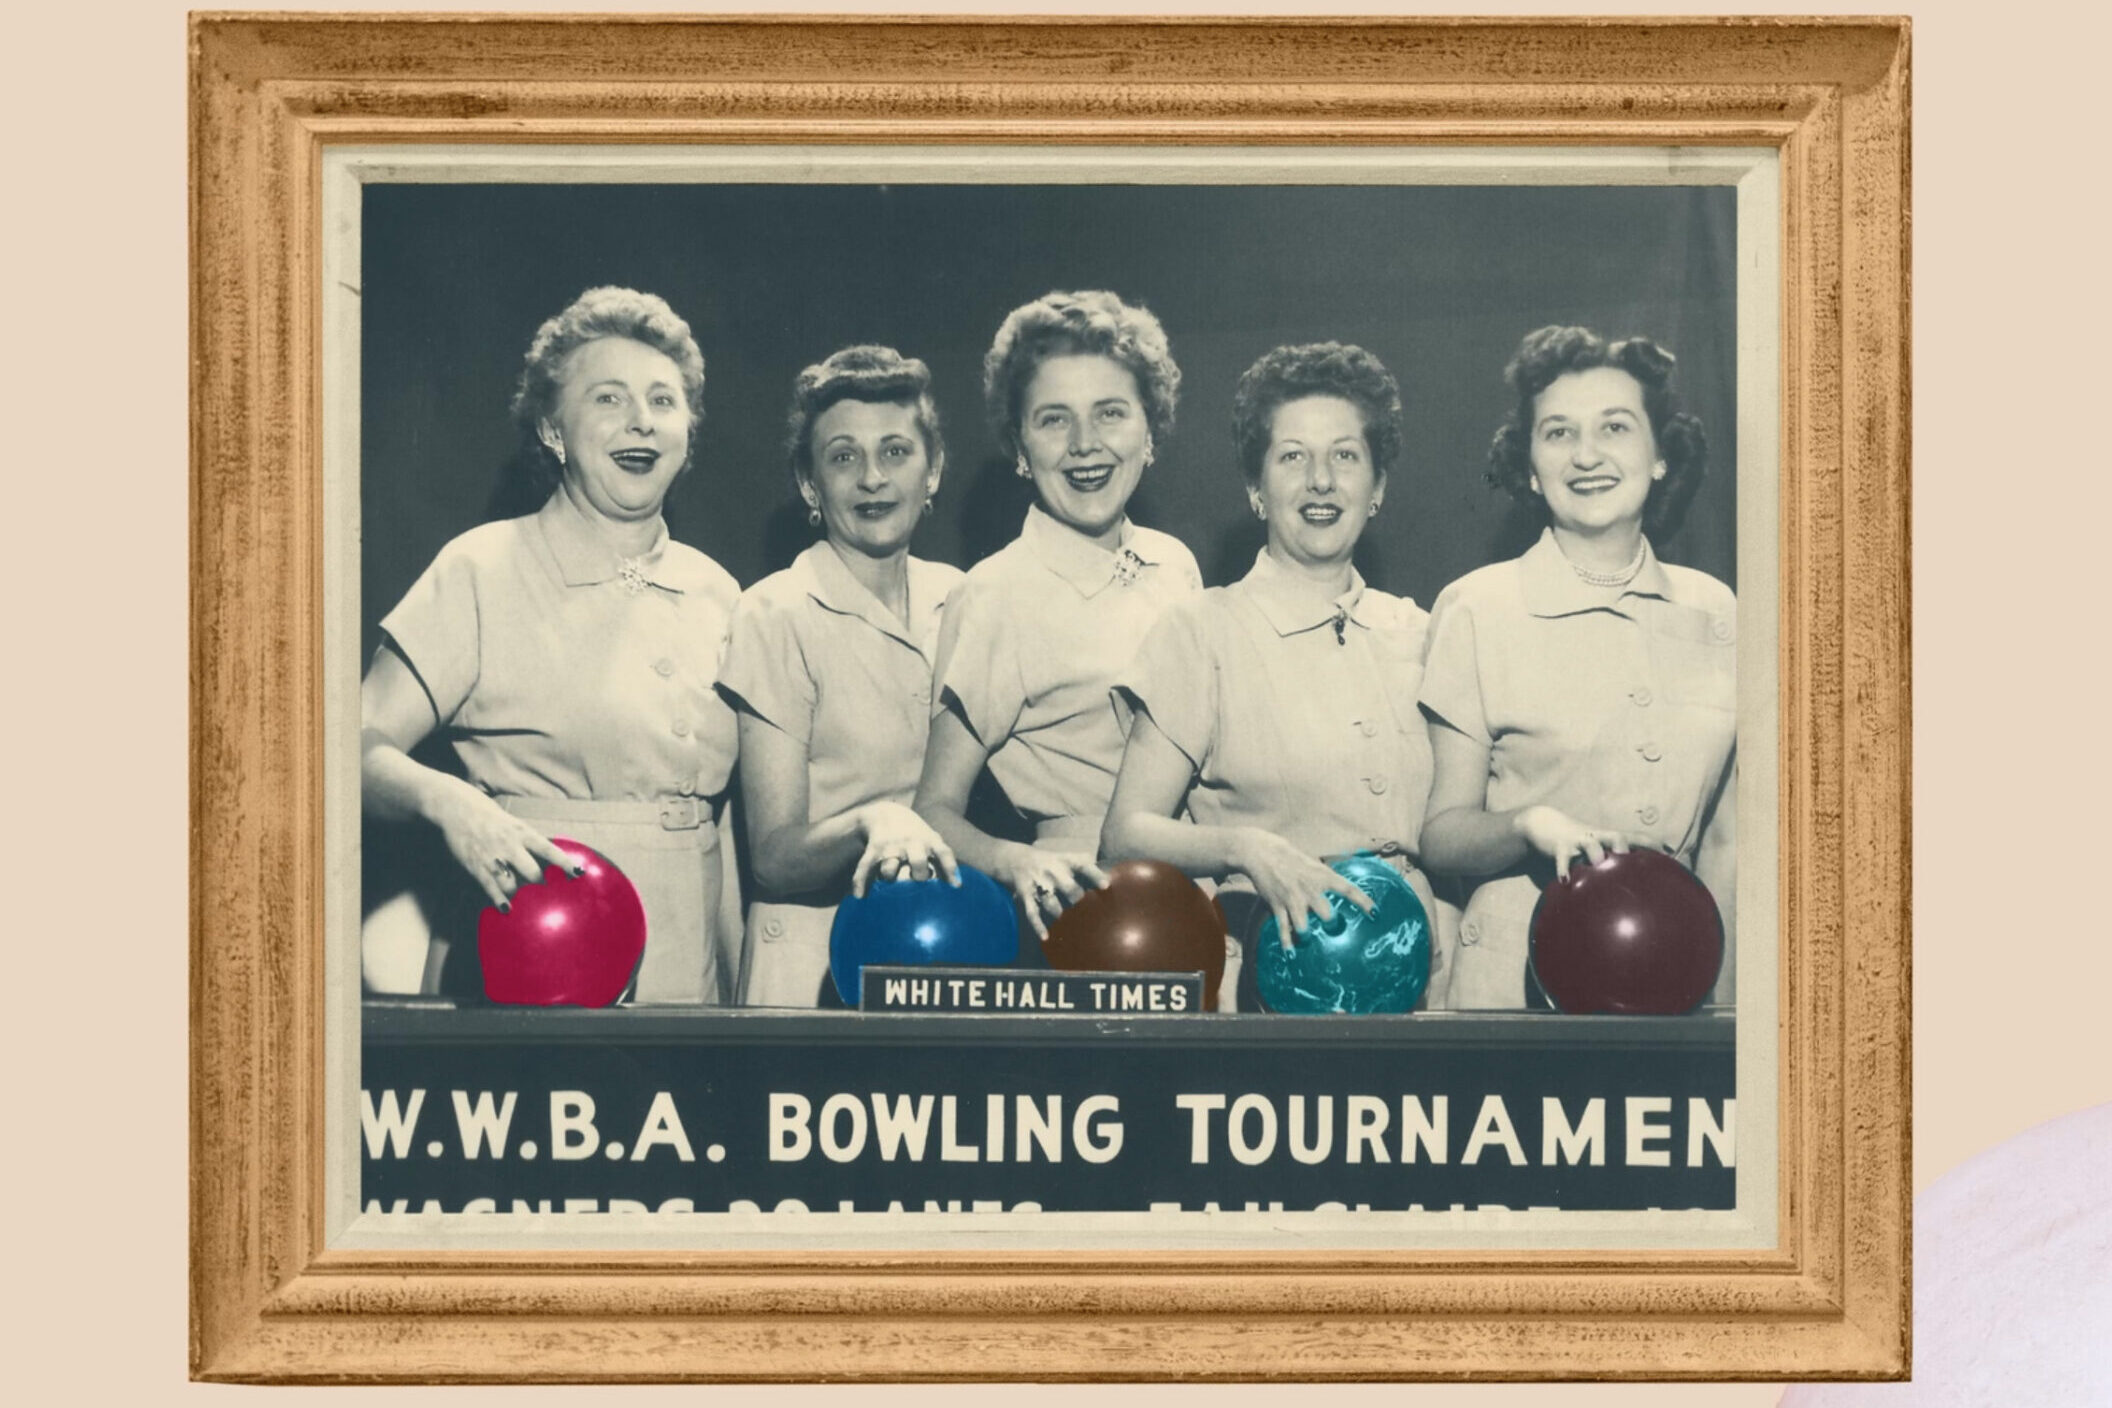 Join or Die bowling club image